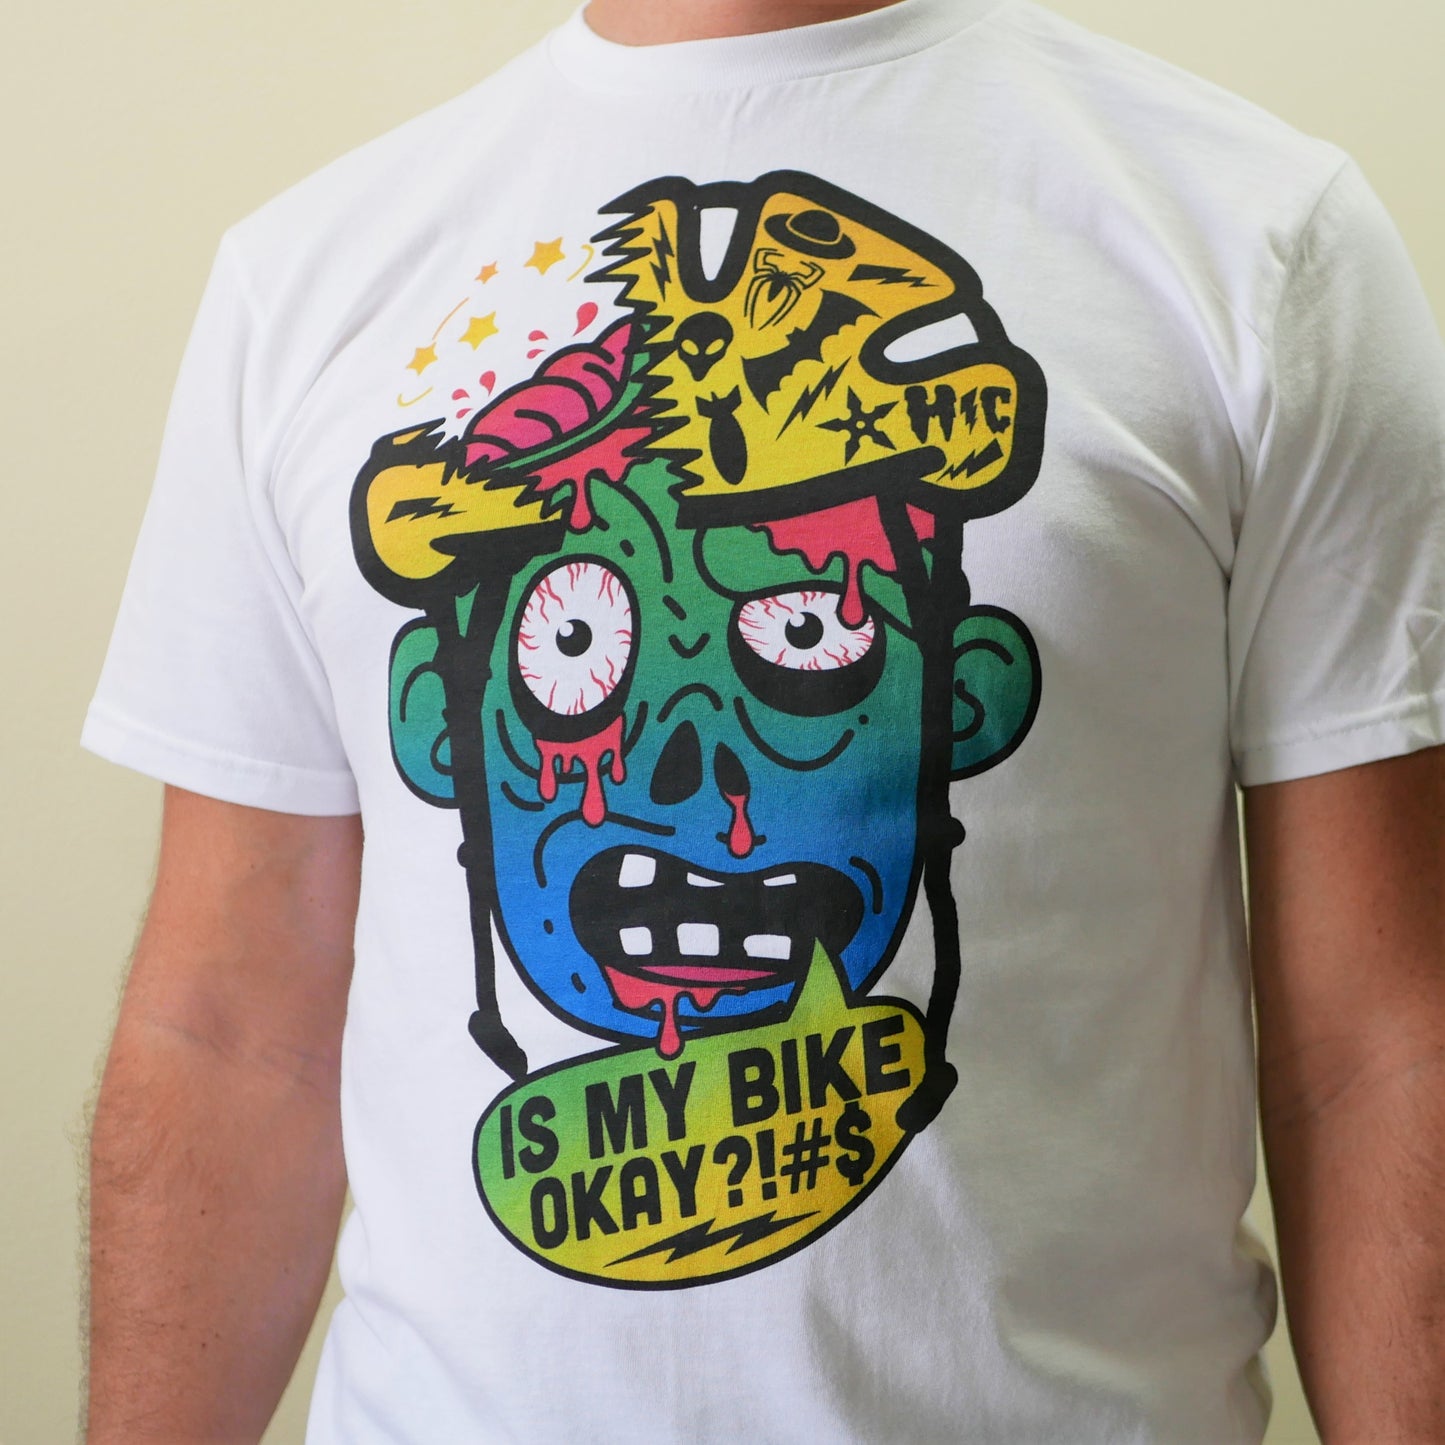 Limited Edition "Crashed Cyclist" Color Print White T